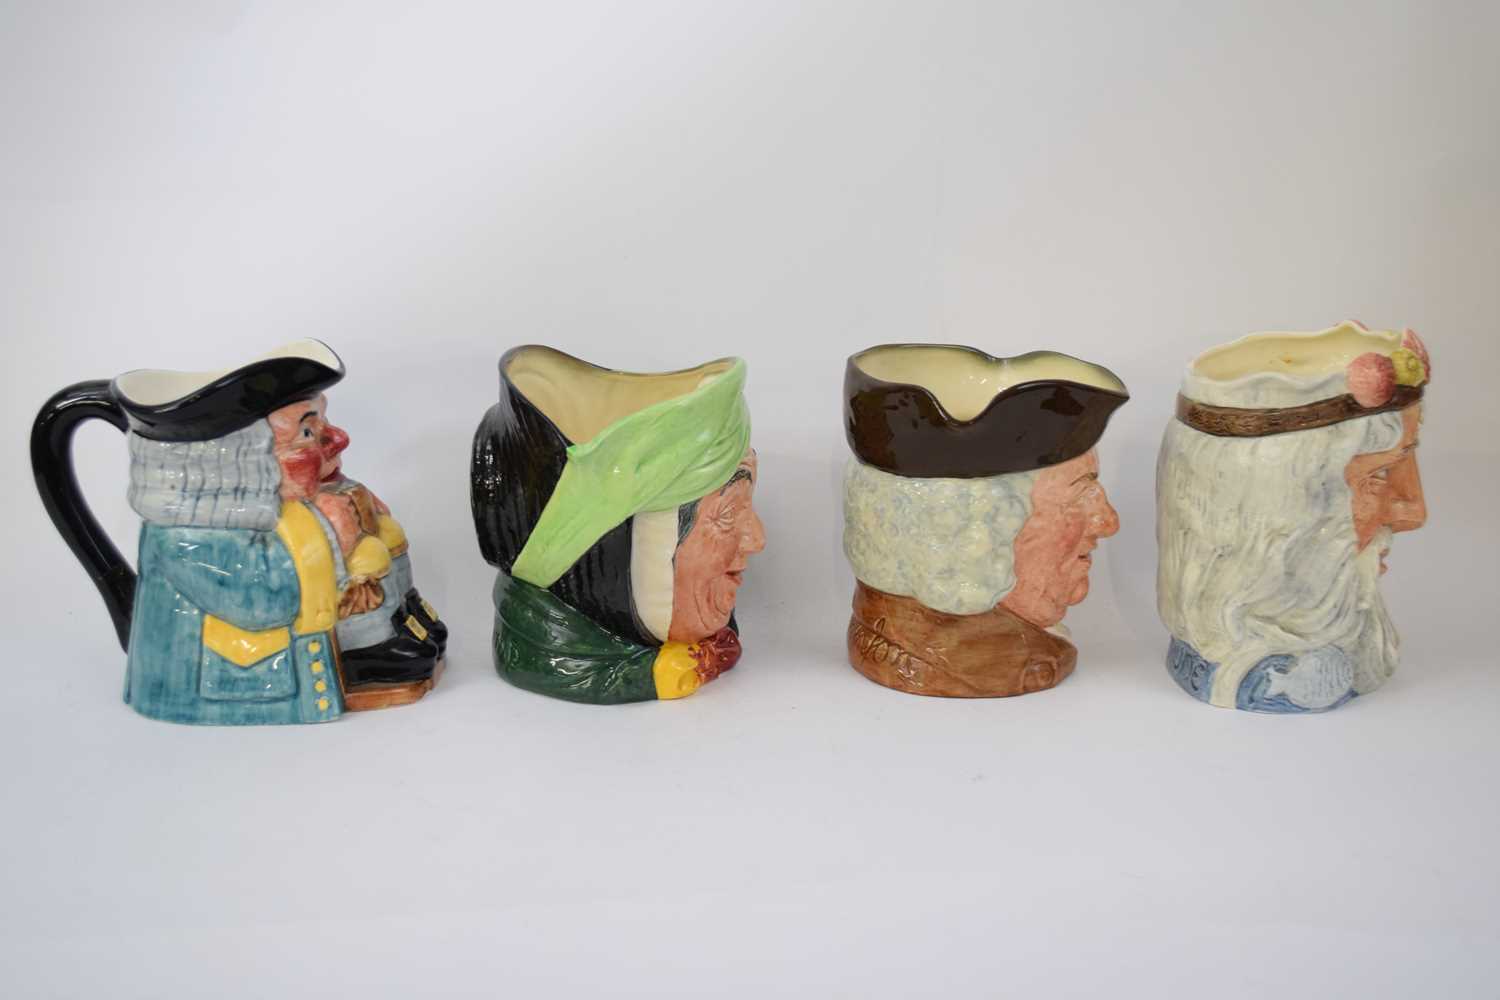 Group of character jugs, Royal Doulton Sari Gamp, Sam Johnson, Neptune and a Clarice Cliff